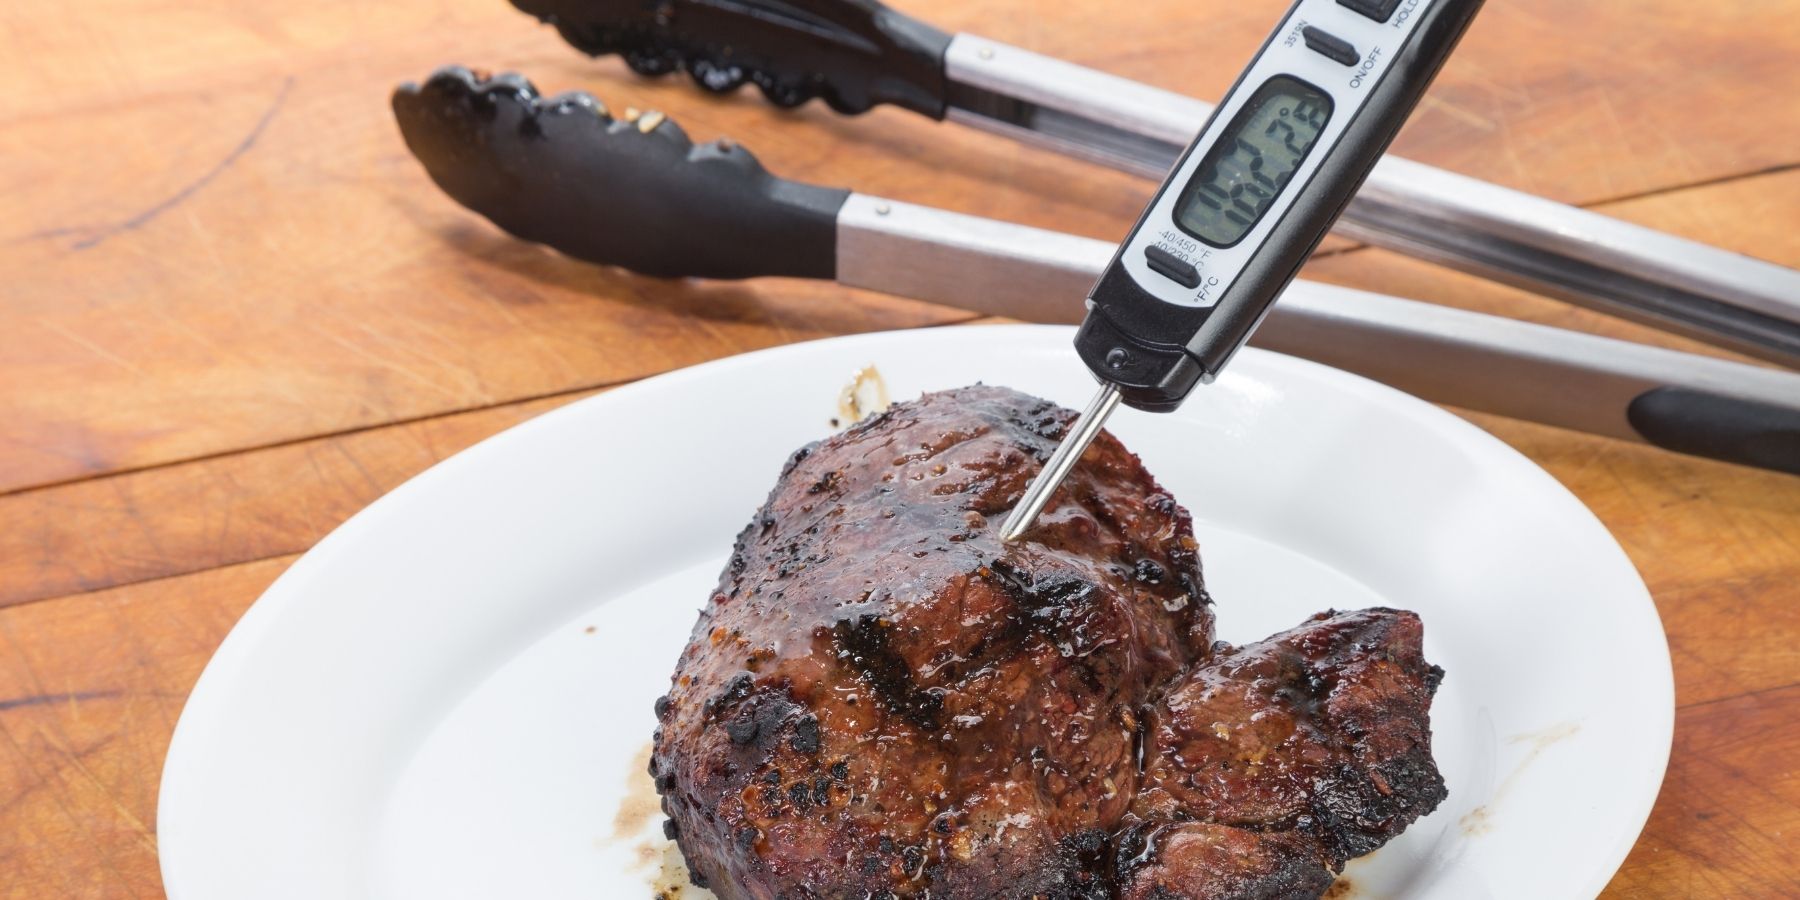 How Does A Digital Cooking Thermometer Work?